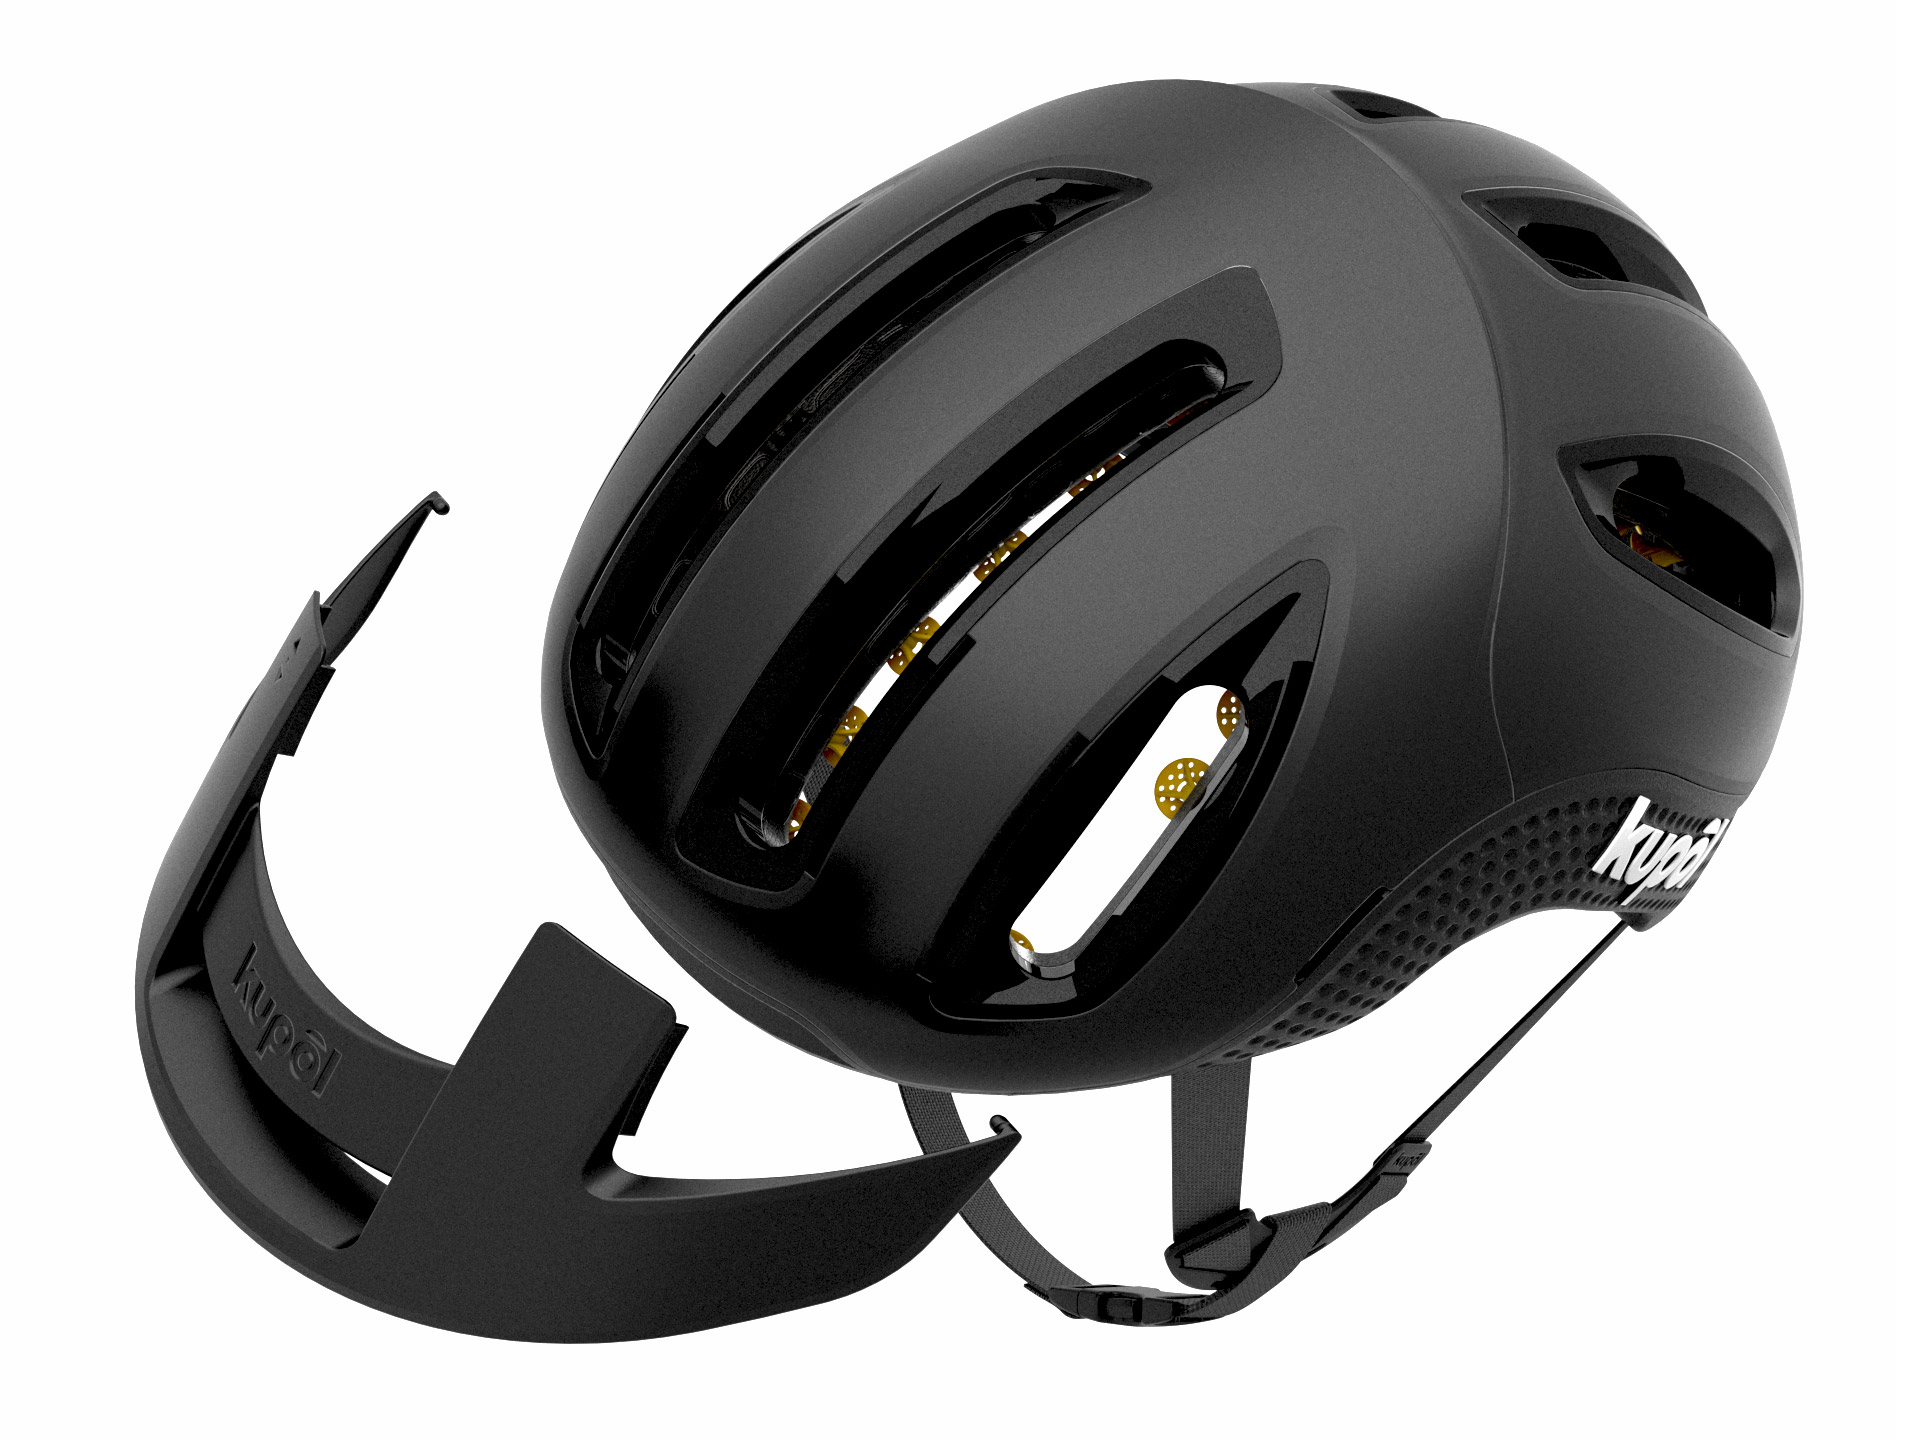 The first 3D printed helmet from Kupol puts a new spin on comfort & safety